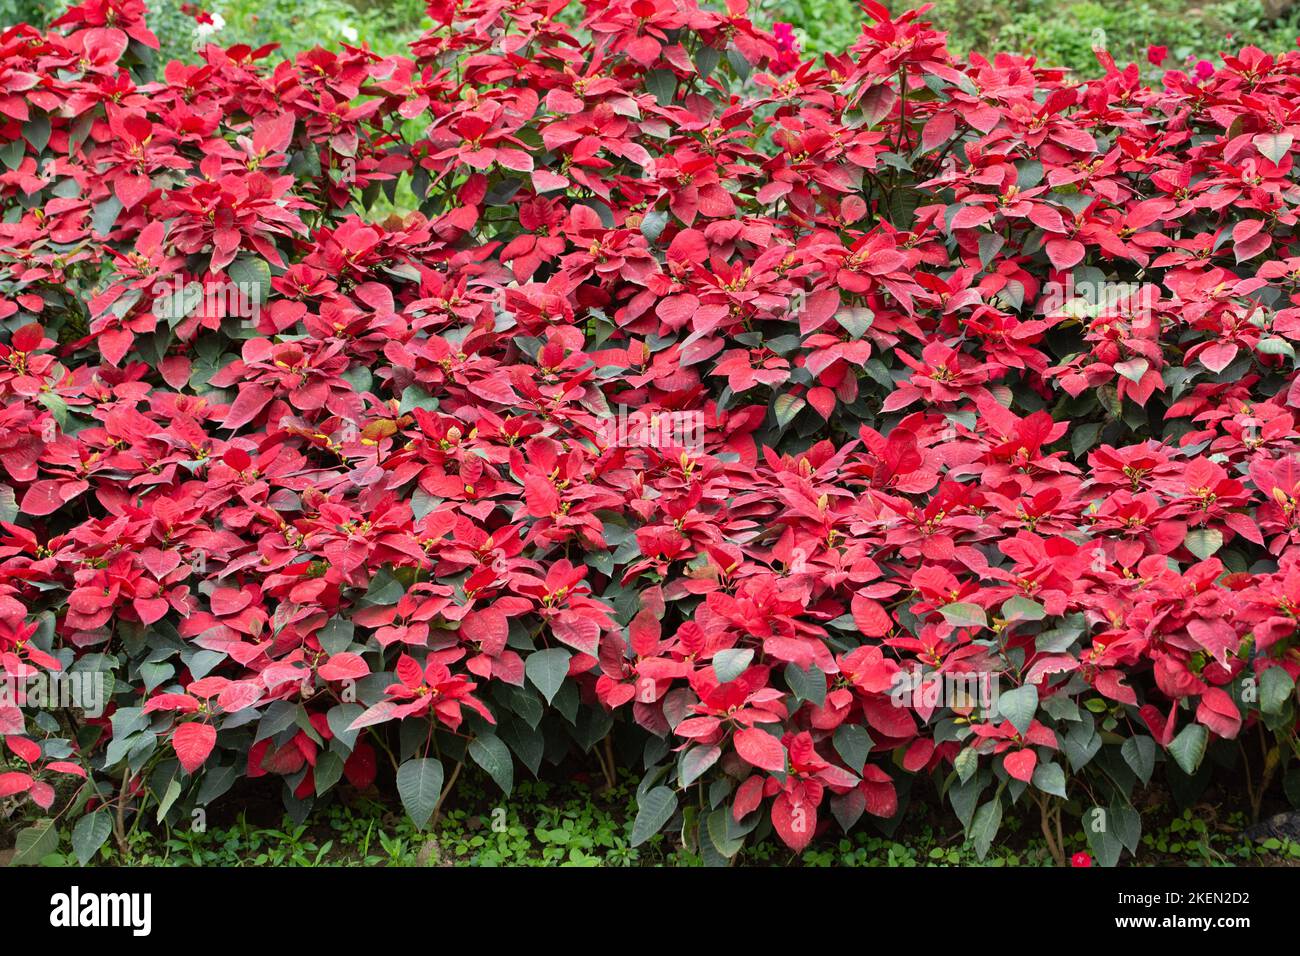 A beautiful Alternanthera Plant growing in the garden Stock Photo